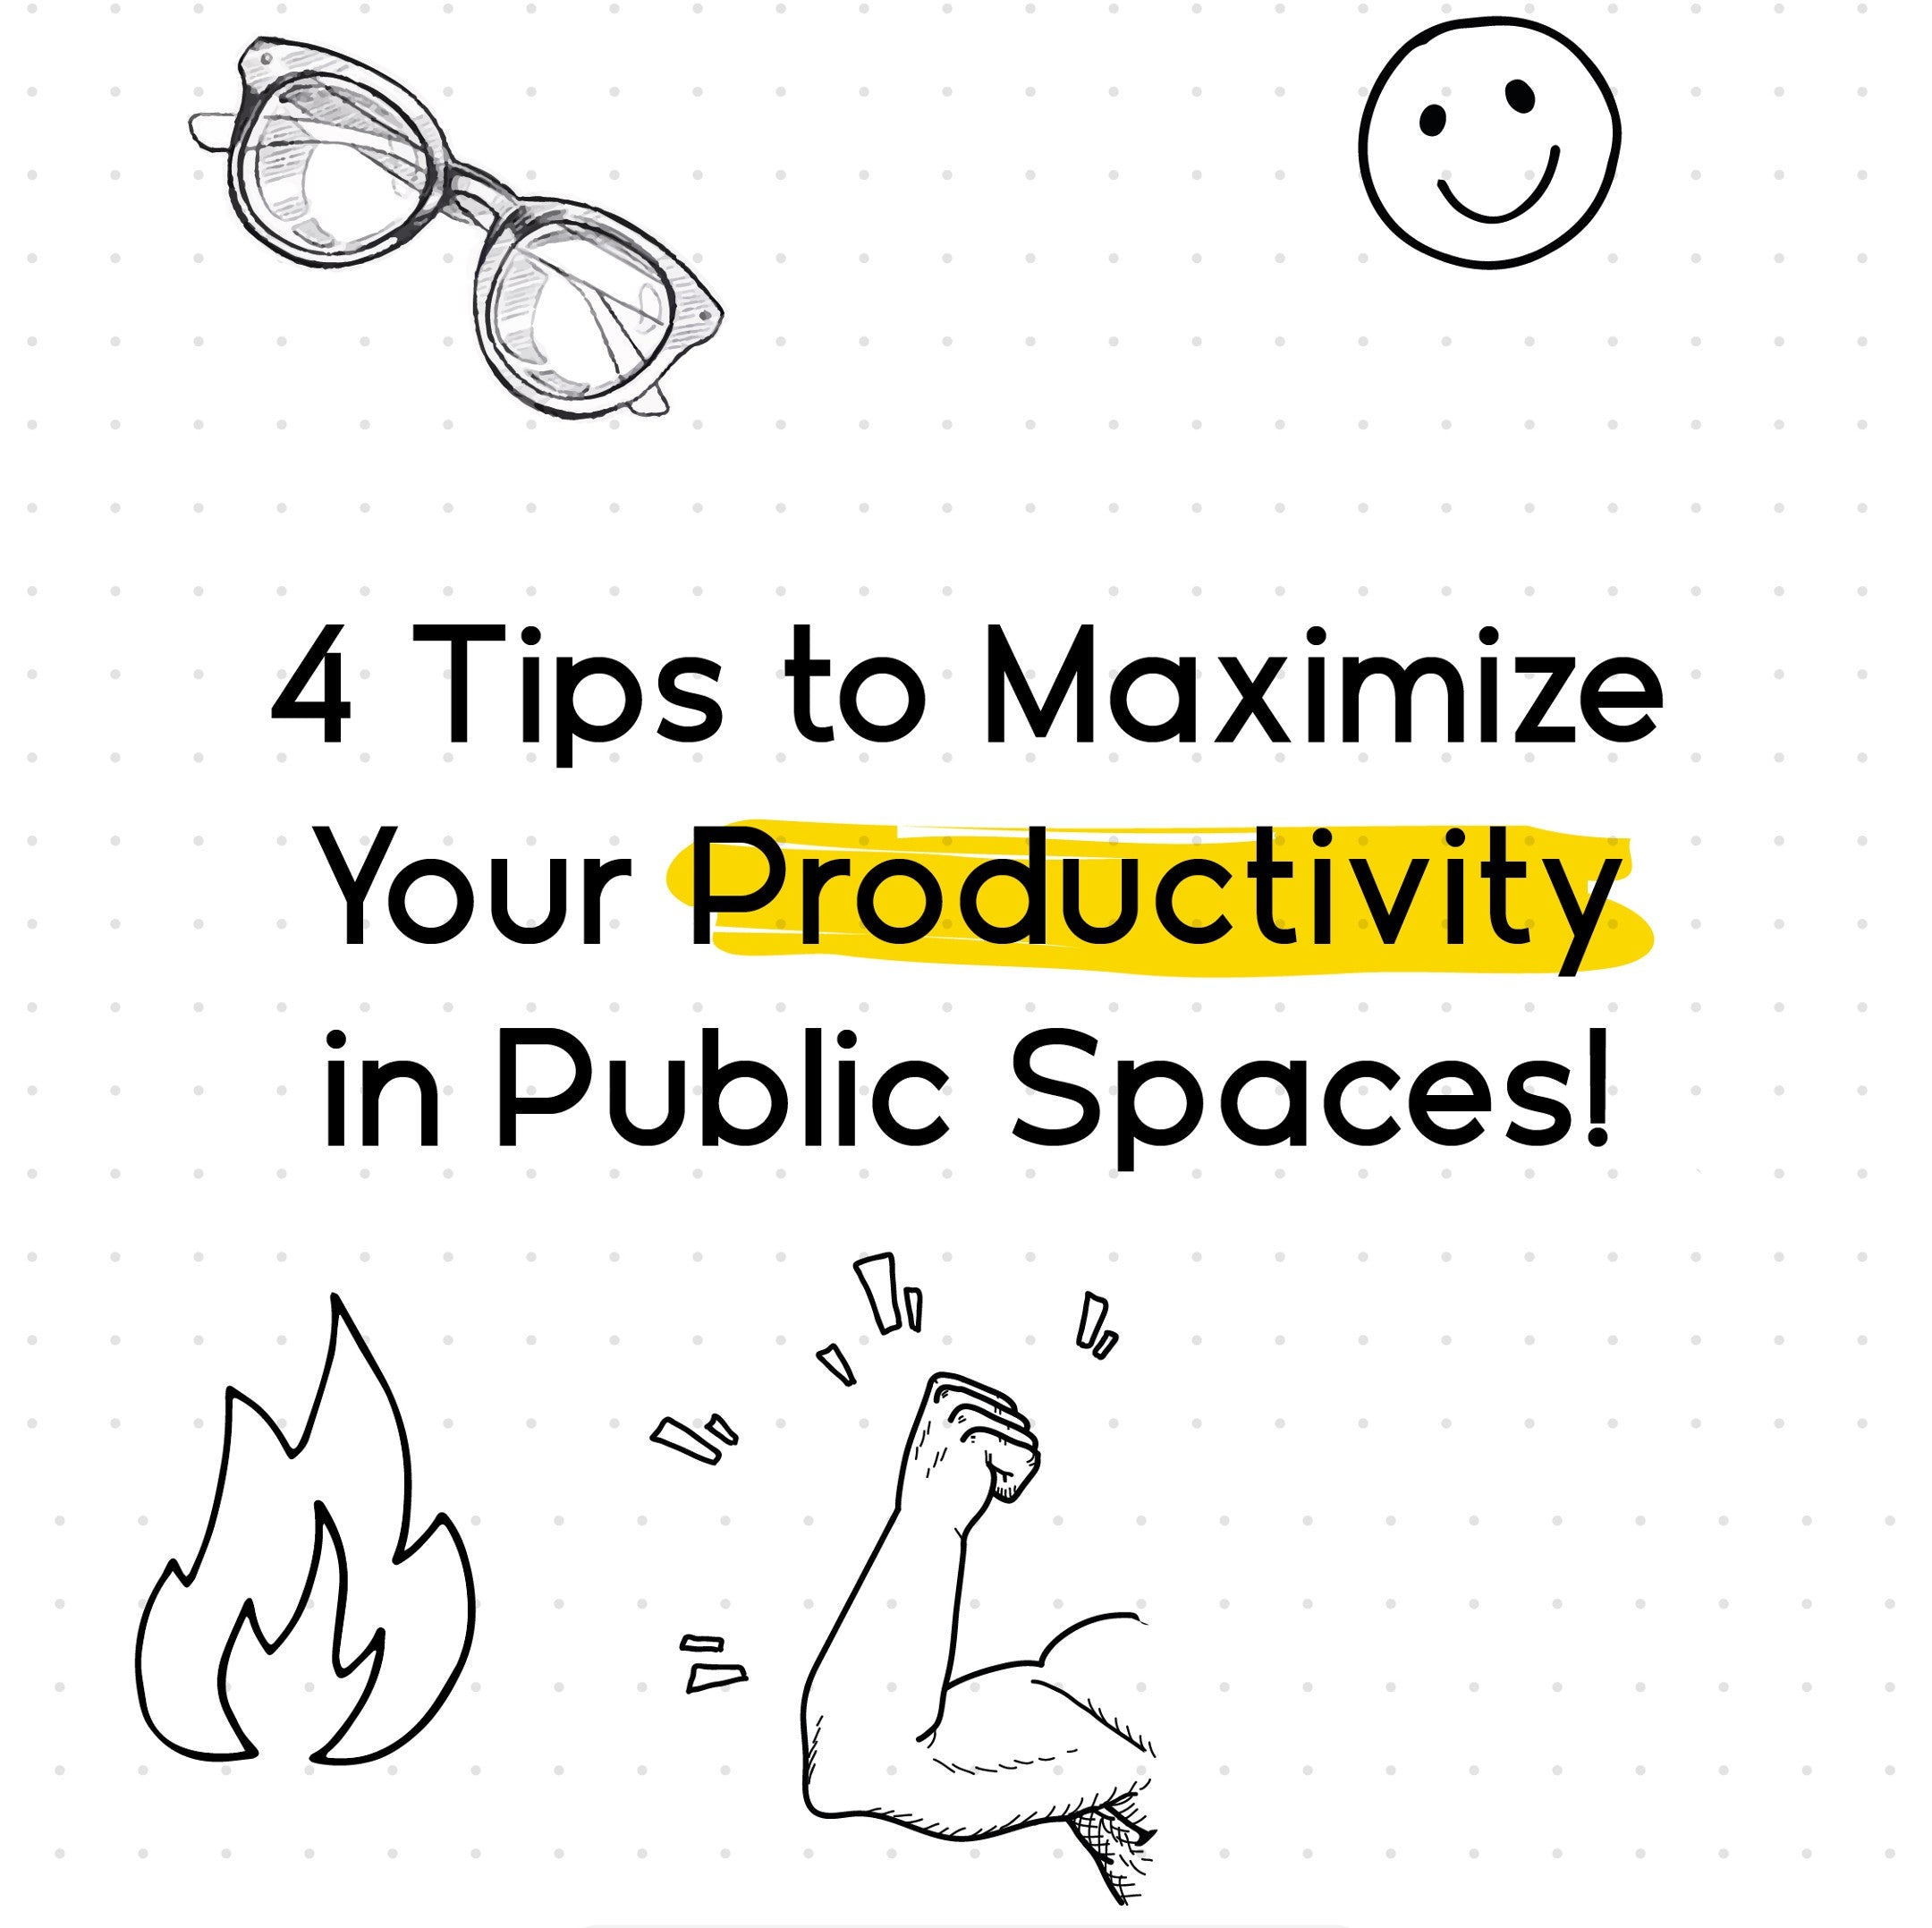 4 tips for maximizing productivity in public places